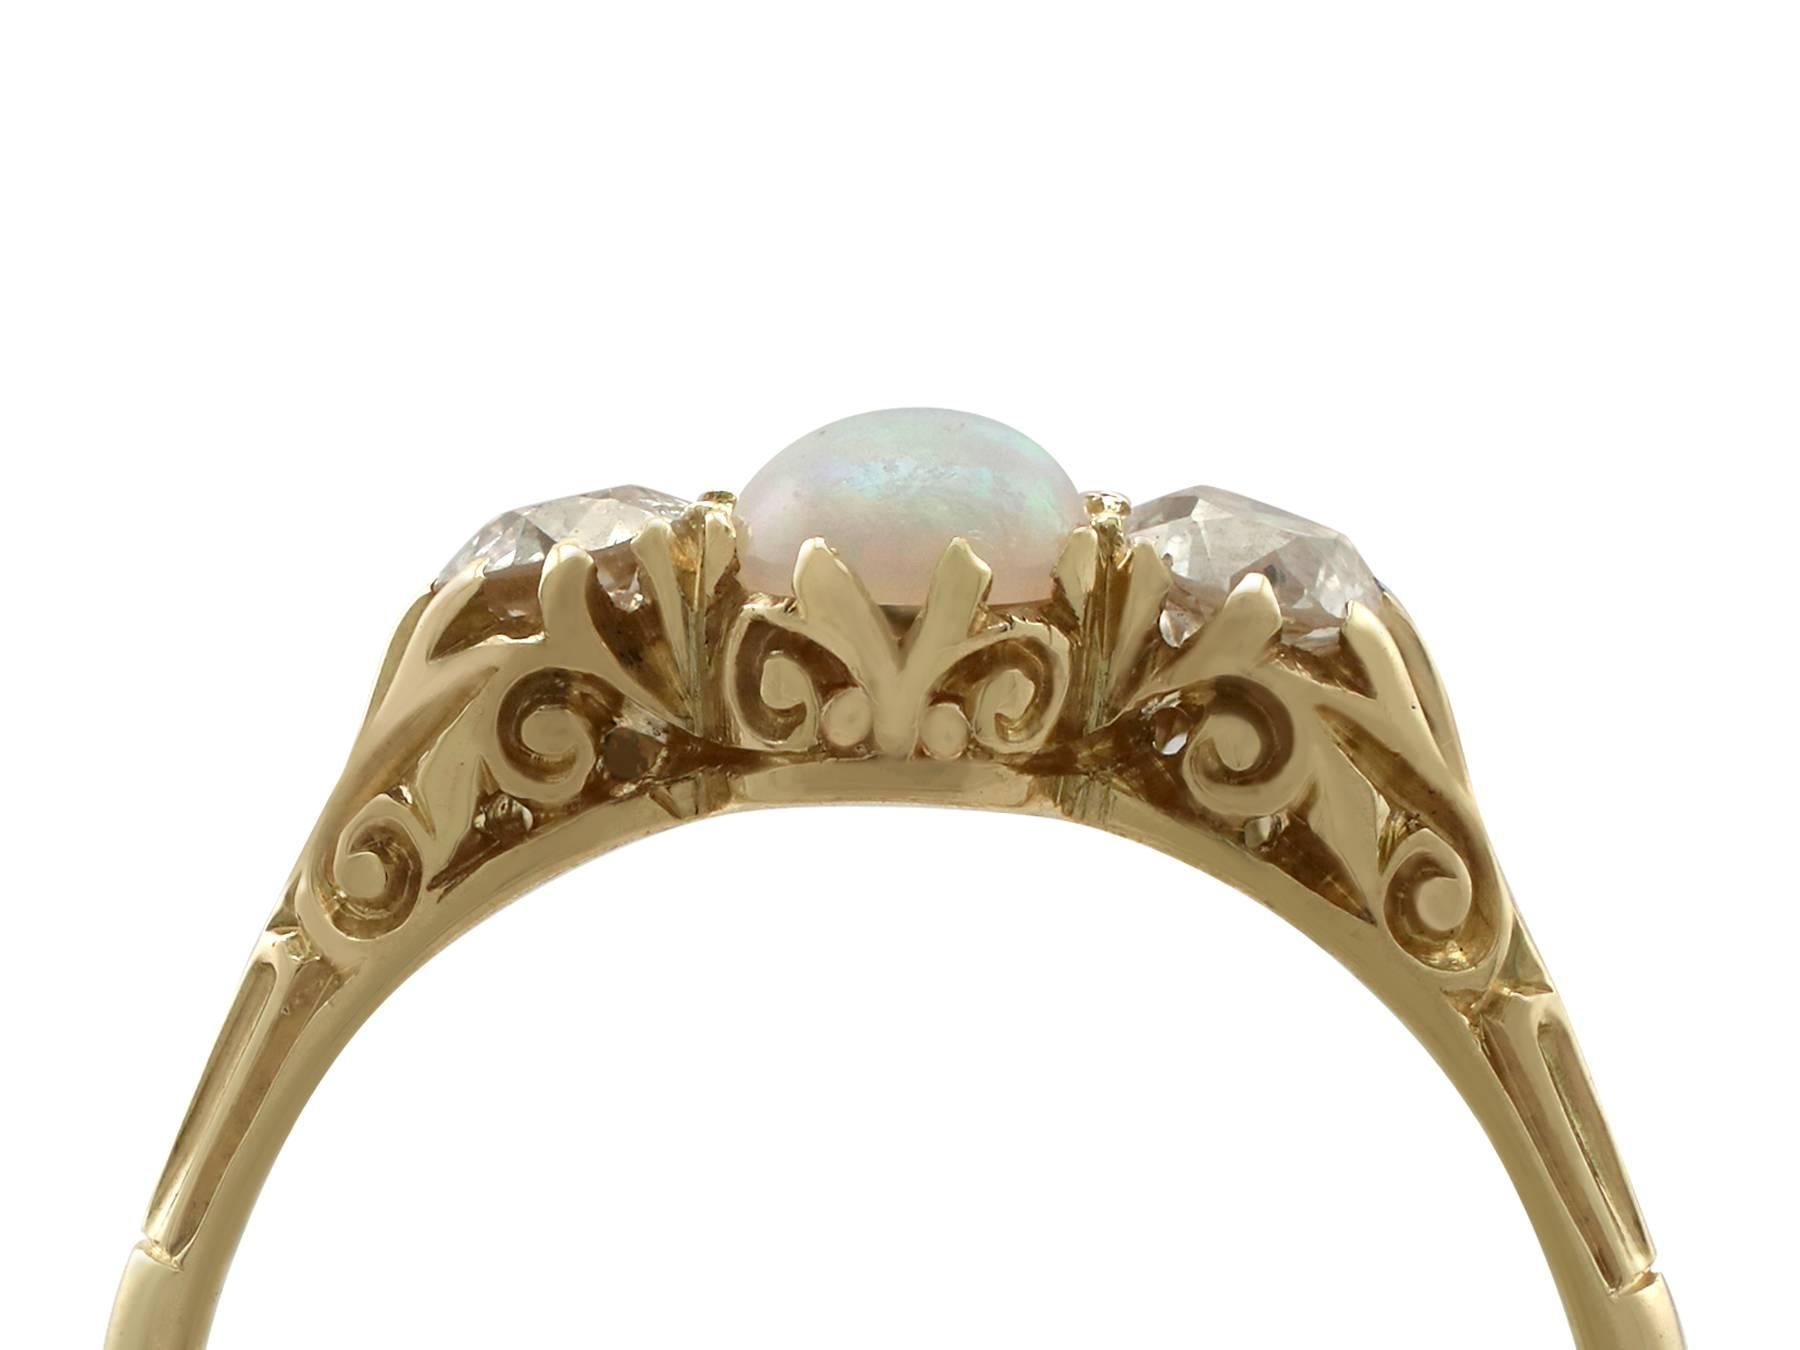 A fine and impressive 0.48 carat opal and 0.45 carat diamond, 18 karat yellow gold trilogy style dress ring; part of our diverse antique jewelry and estate jewelry collections

This fine and impressive antique opal and diamond ring has been crafted